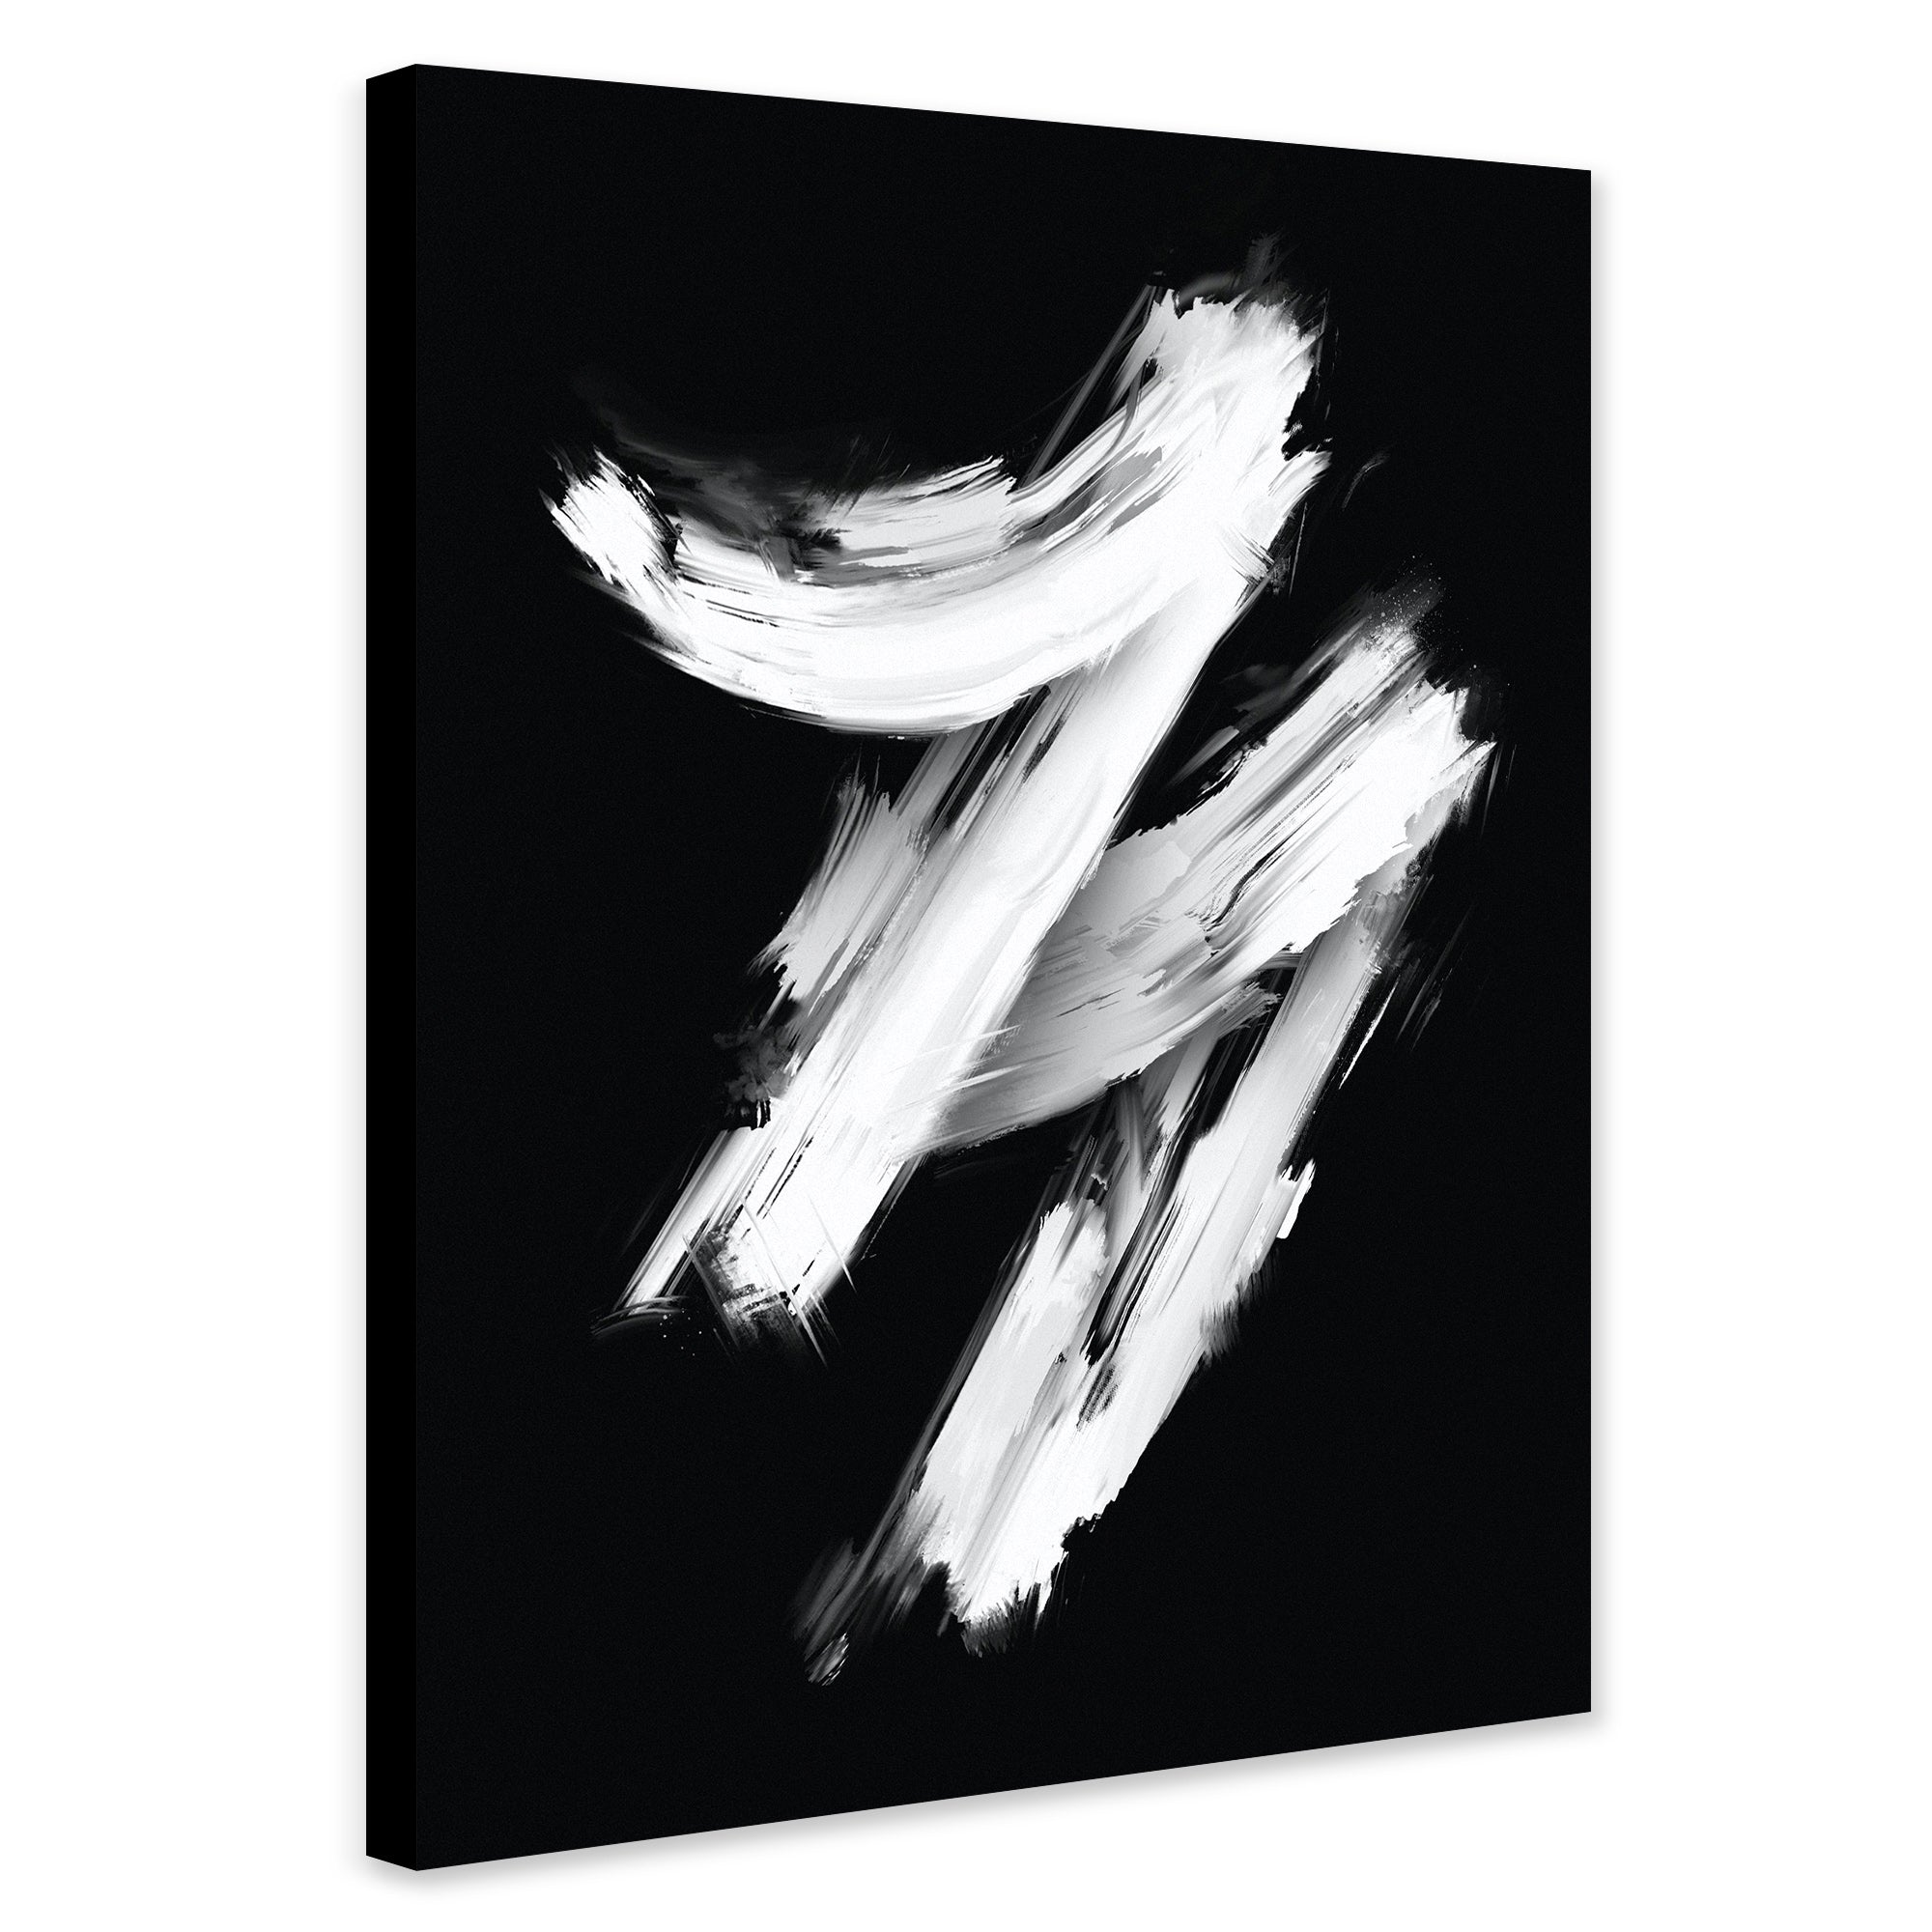 Paint Strokes Wall Art - Black and White - Canvas Wall Art Framed Print - Various Sizes